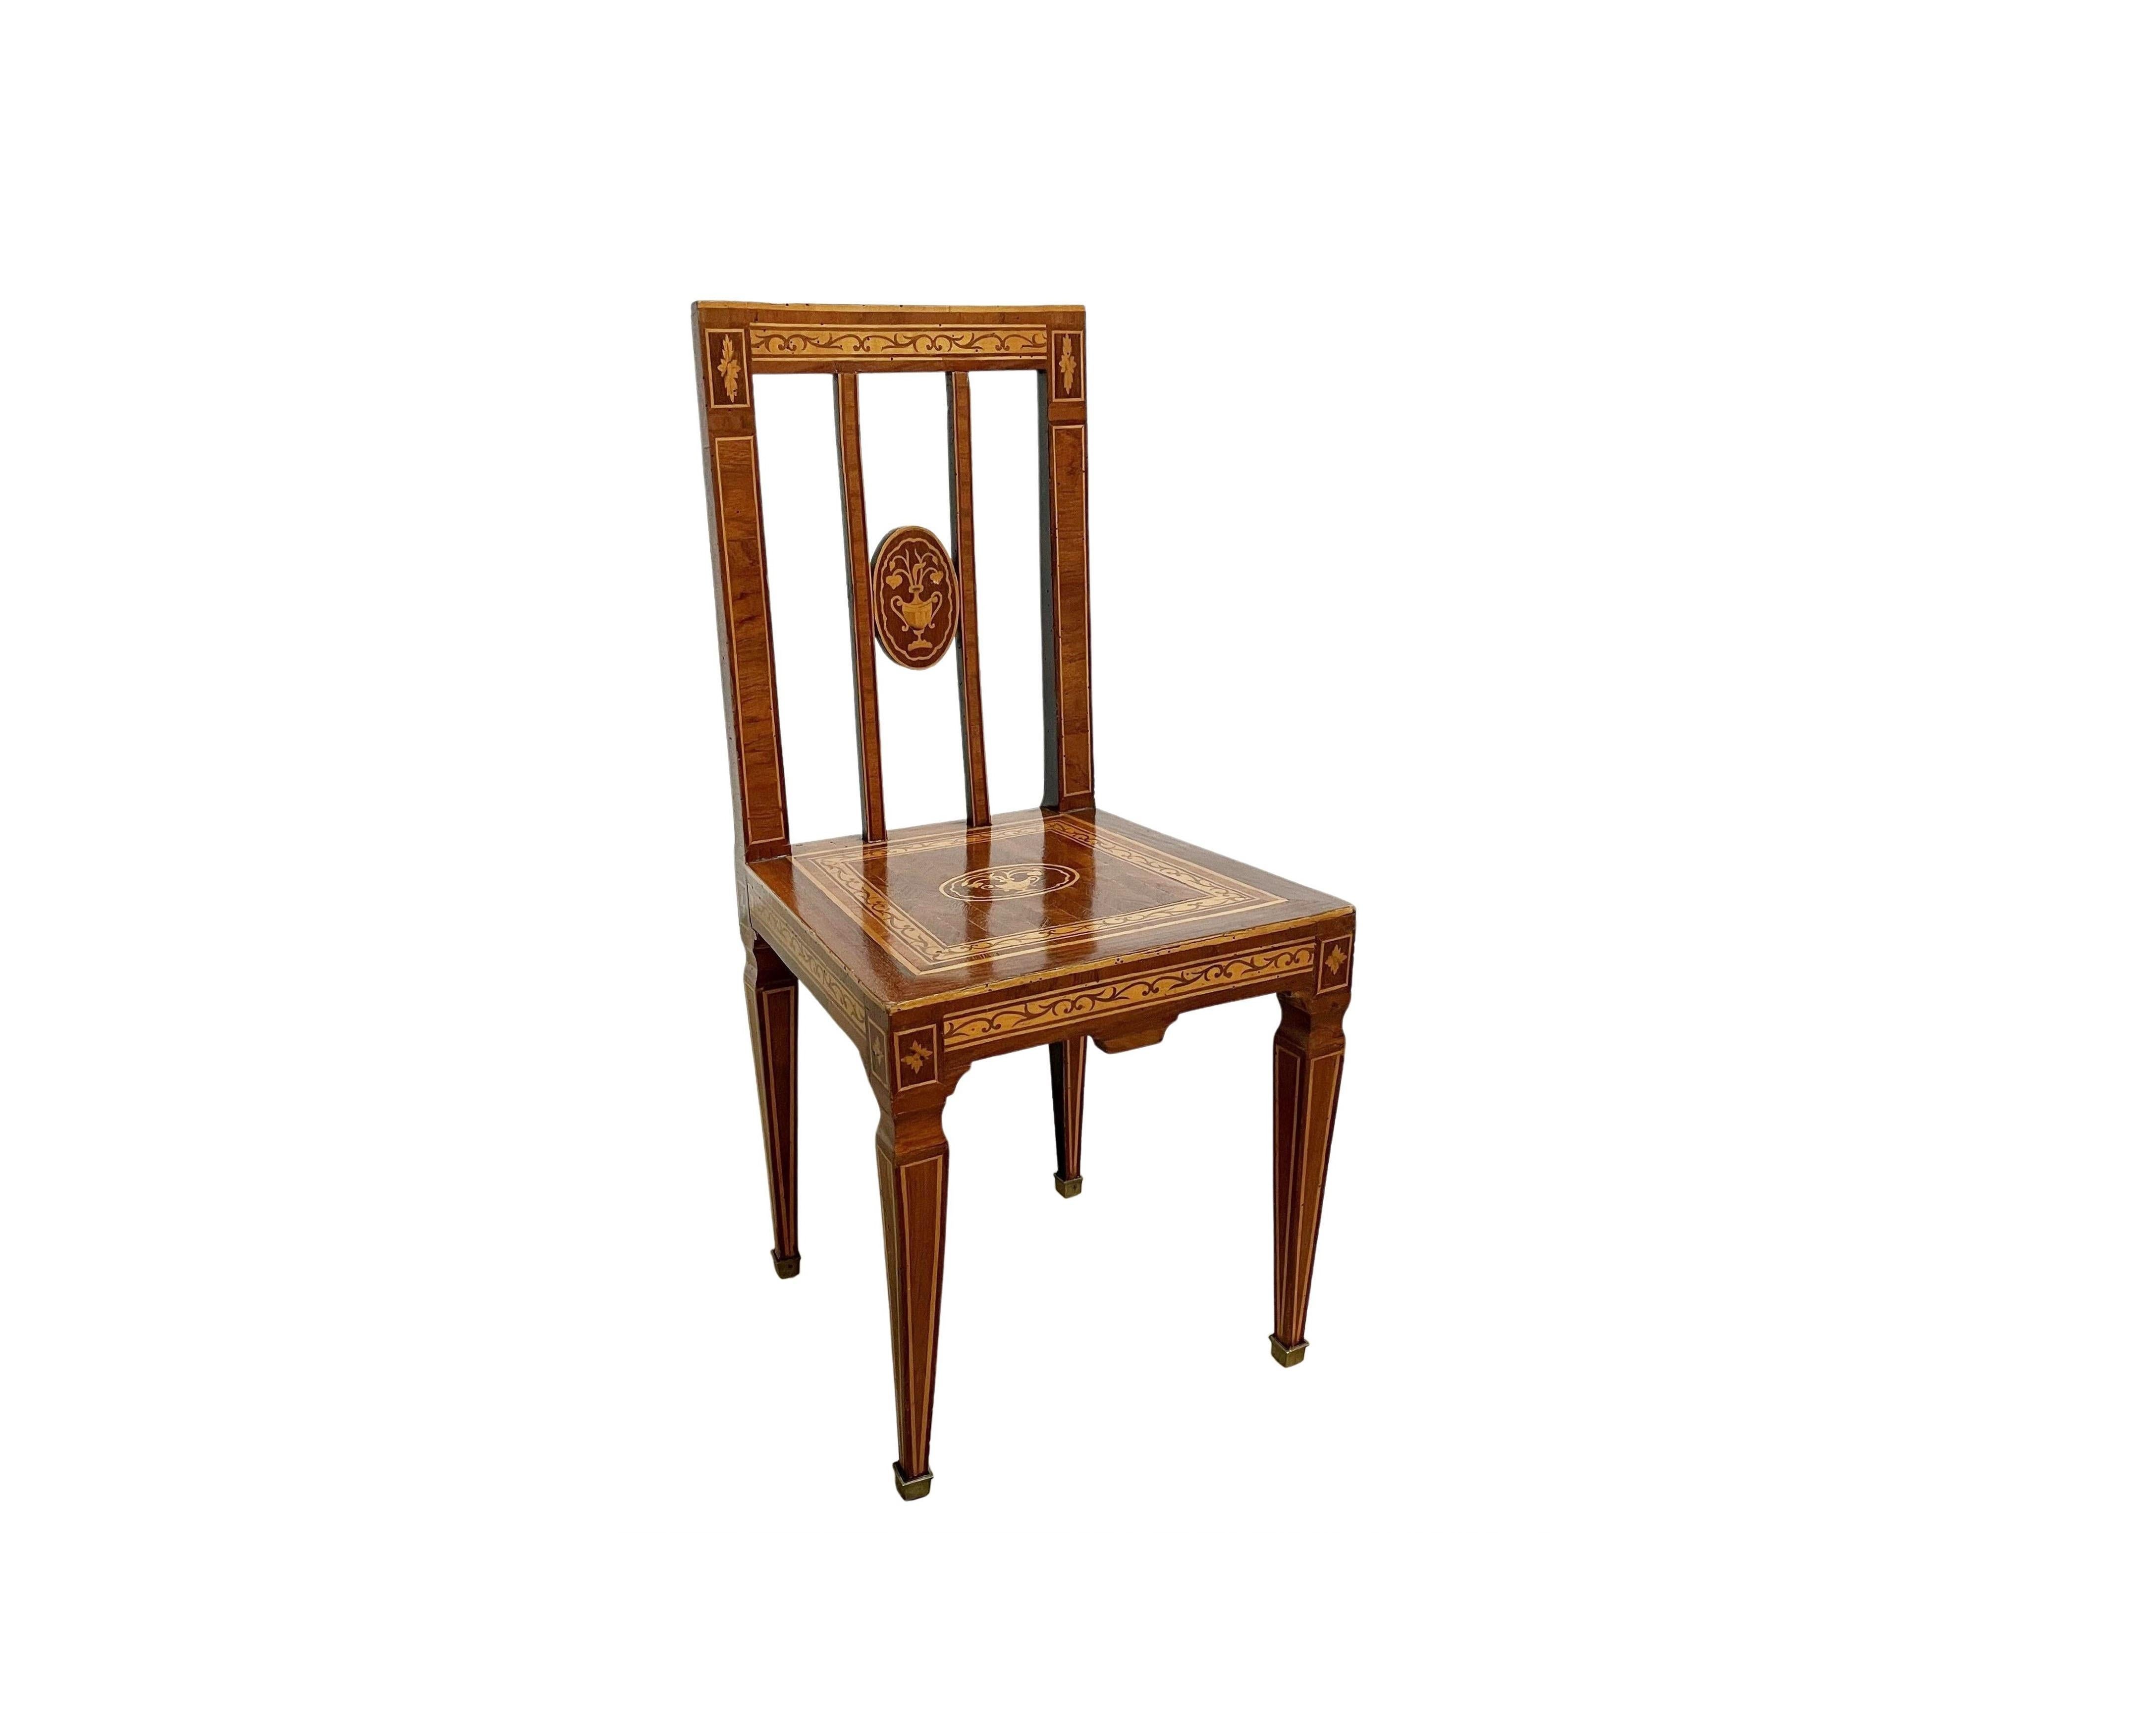 19th Century Neoclassical Marquetry Desk Chair in the Style of Giuseppe Maggiolini, Italy For Sale